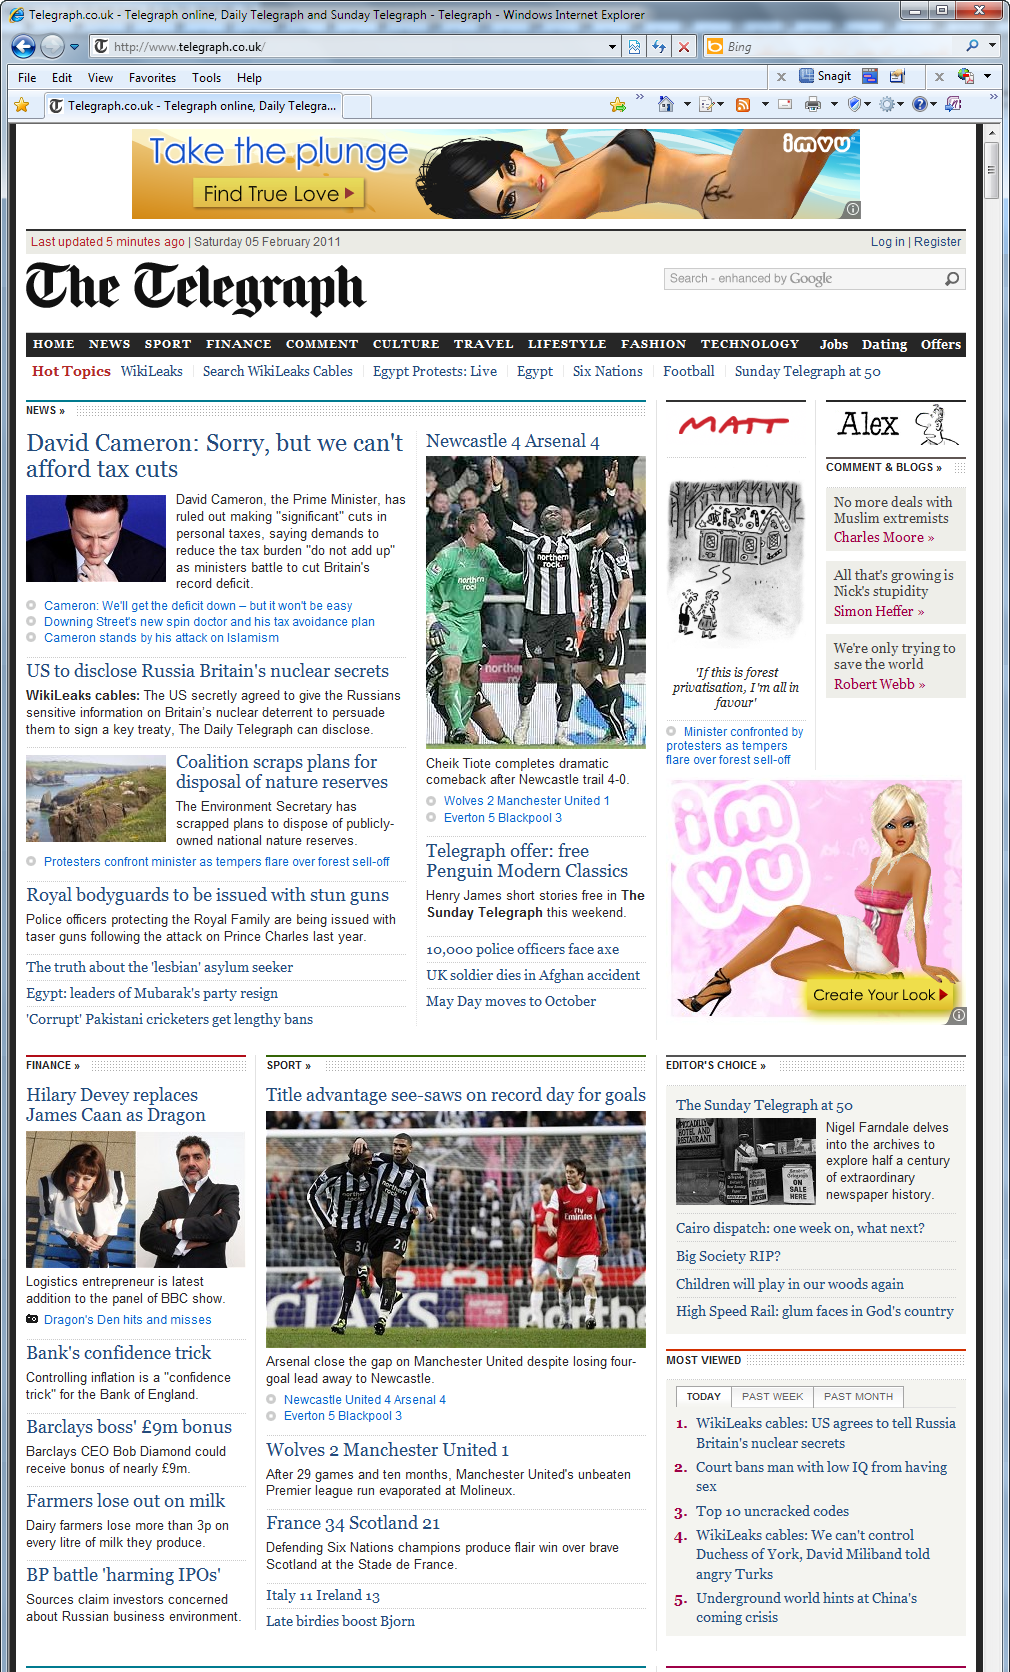 Telegraph website front page, February 5, 2011.